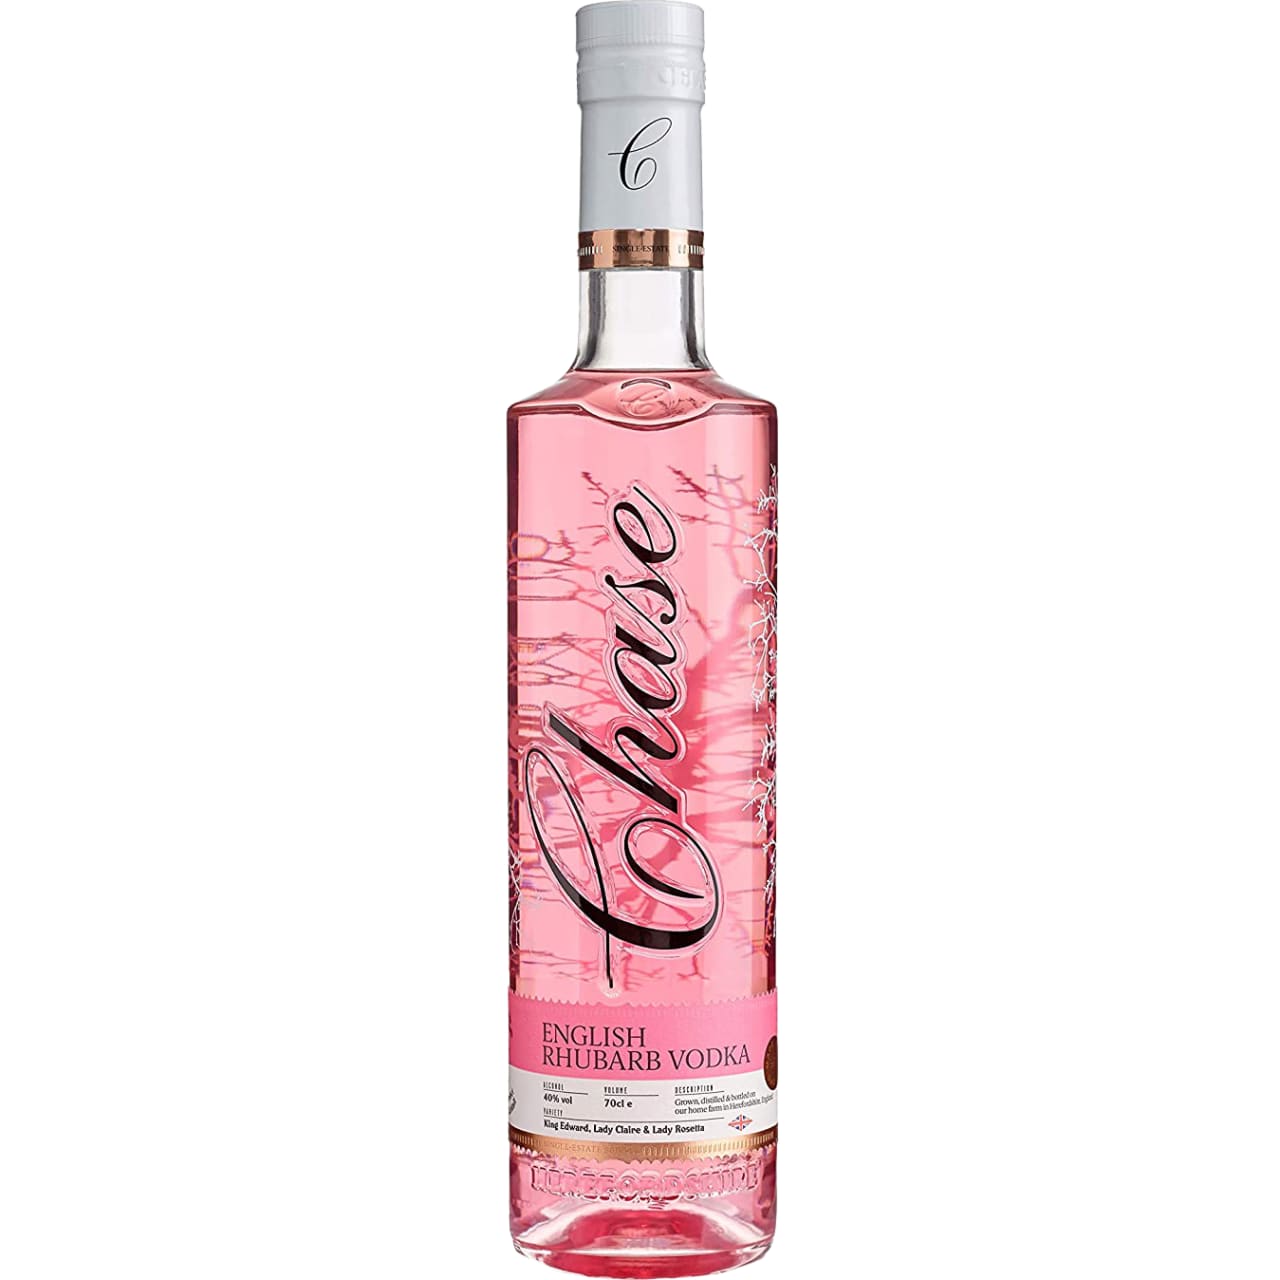 A delicious, sweet infusion of Chase Vodka and freshly pressed English rhubarb.